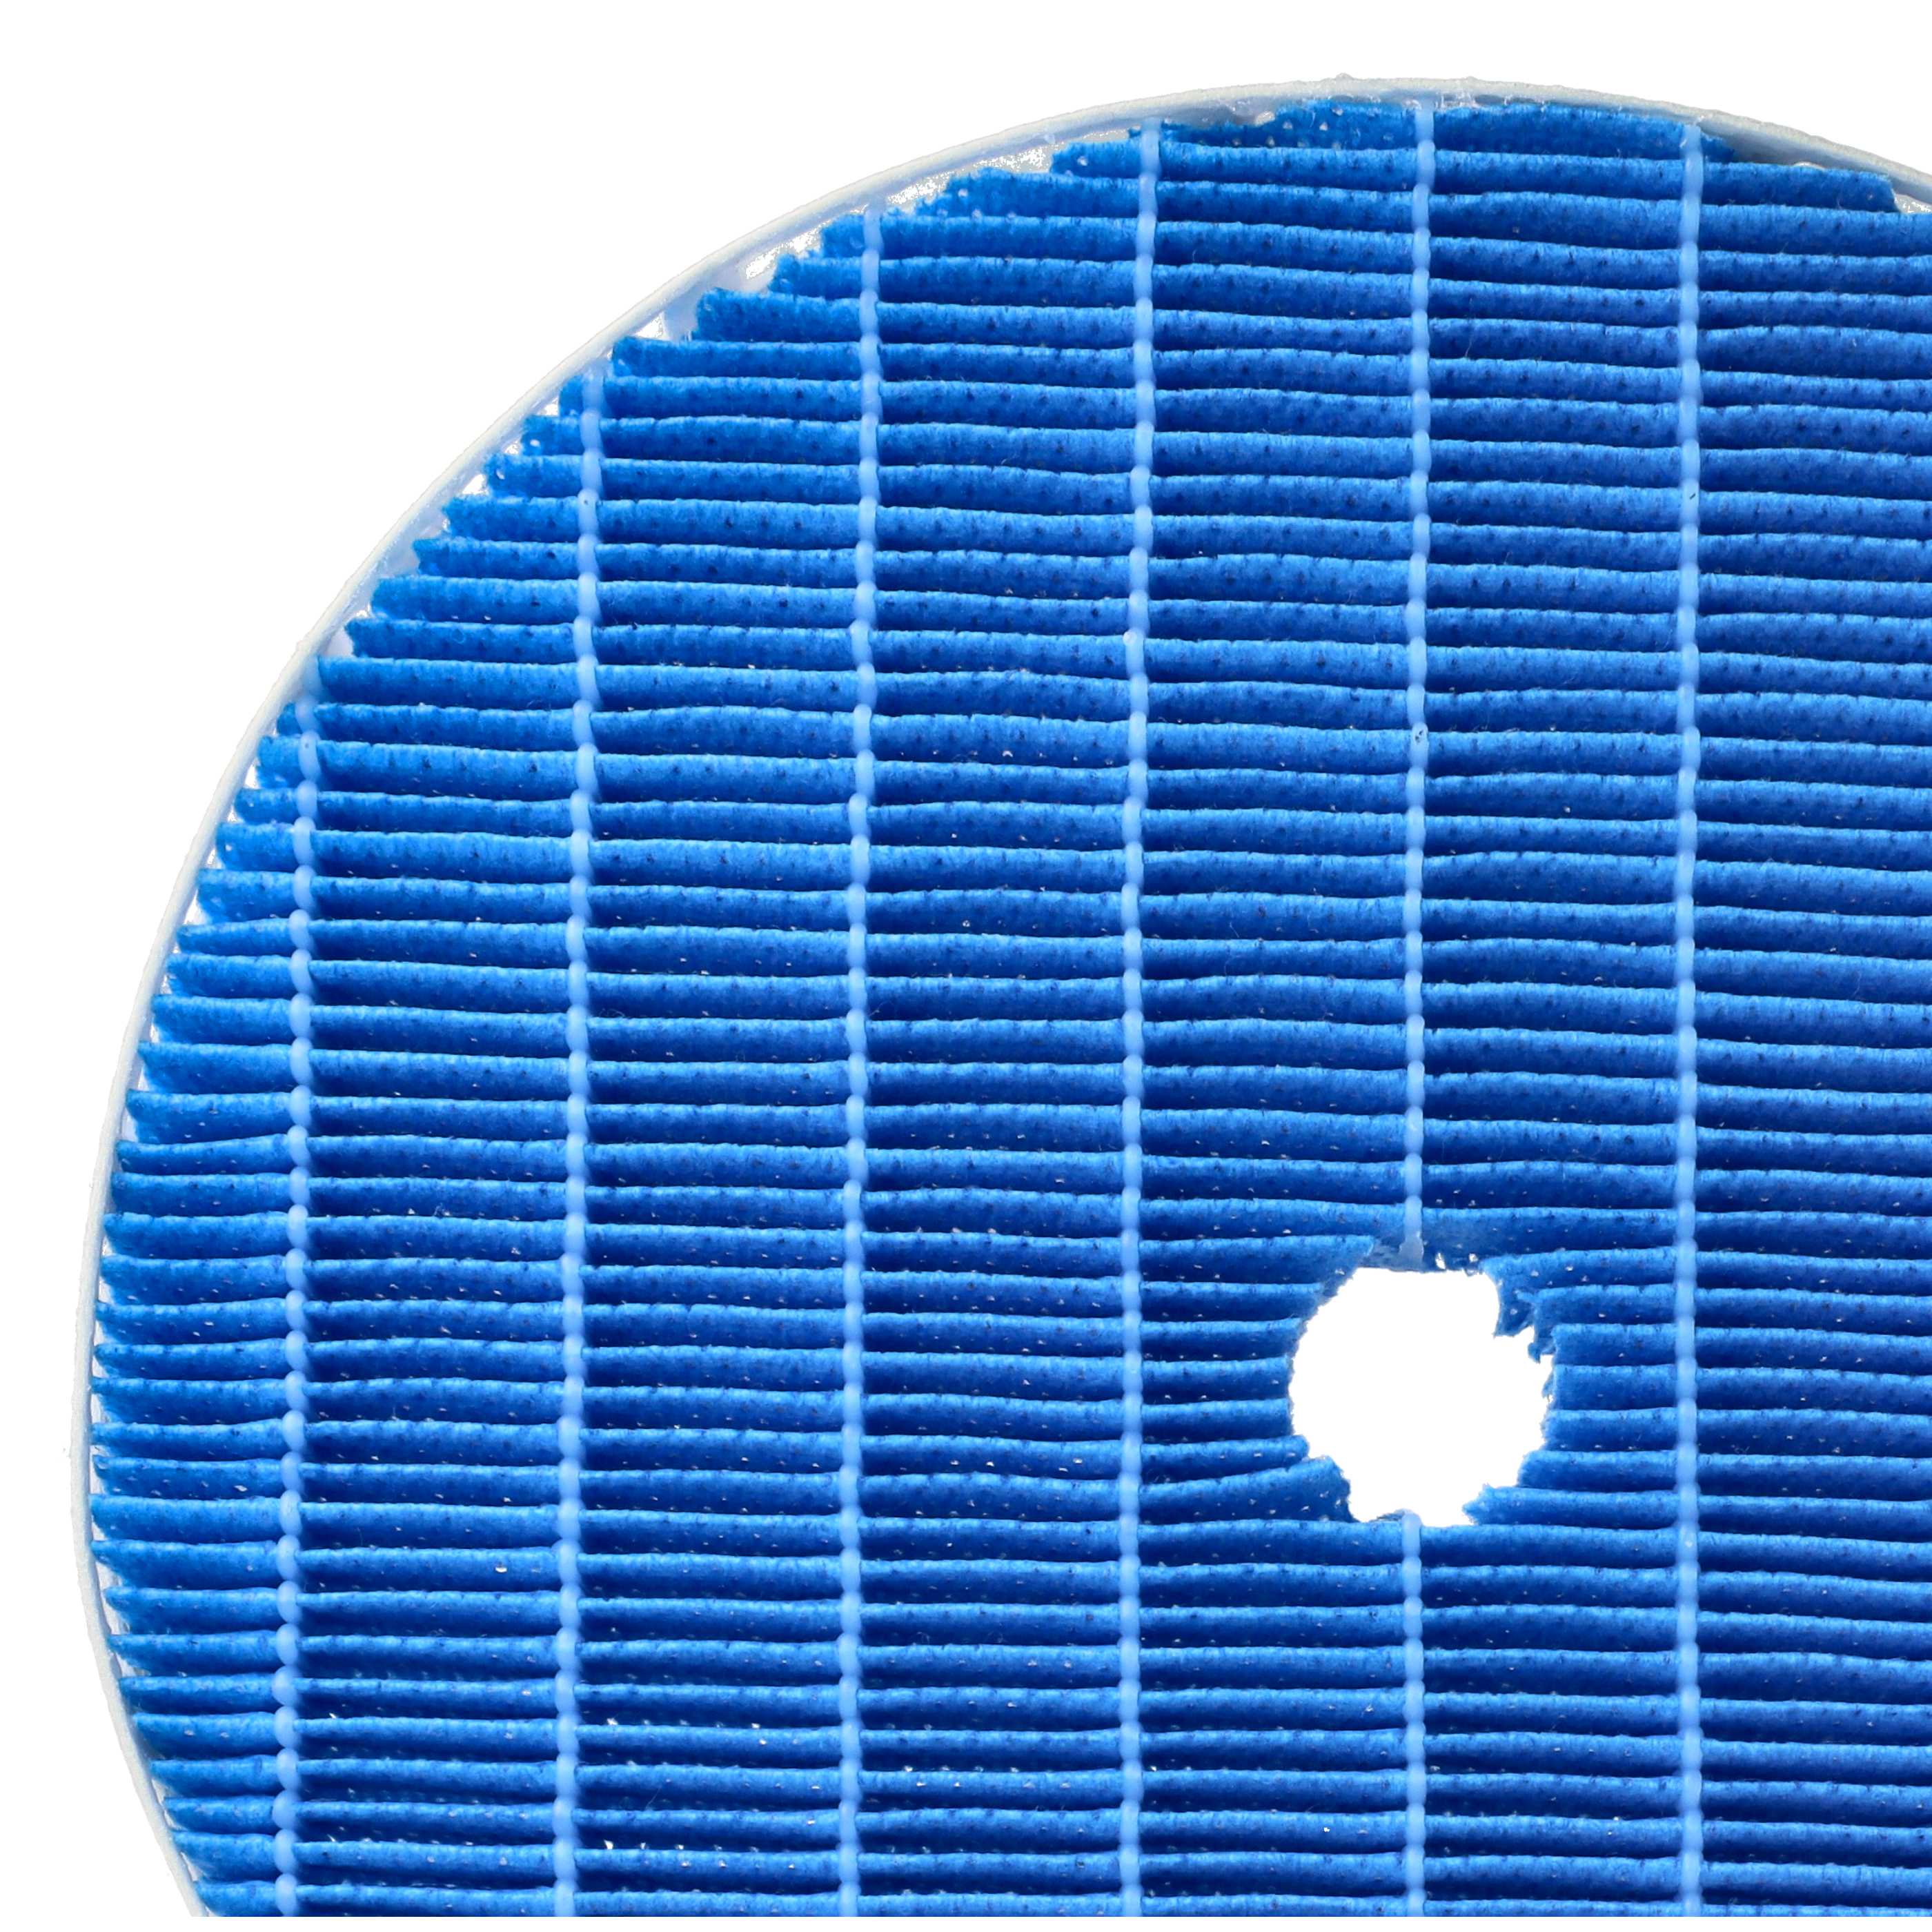 3 Part Filter Set replaces Philips FY3435/30, FY1410/30, FY2422/30 for Air Purifier